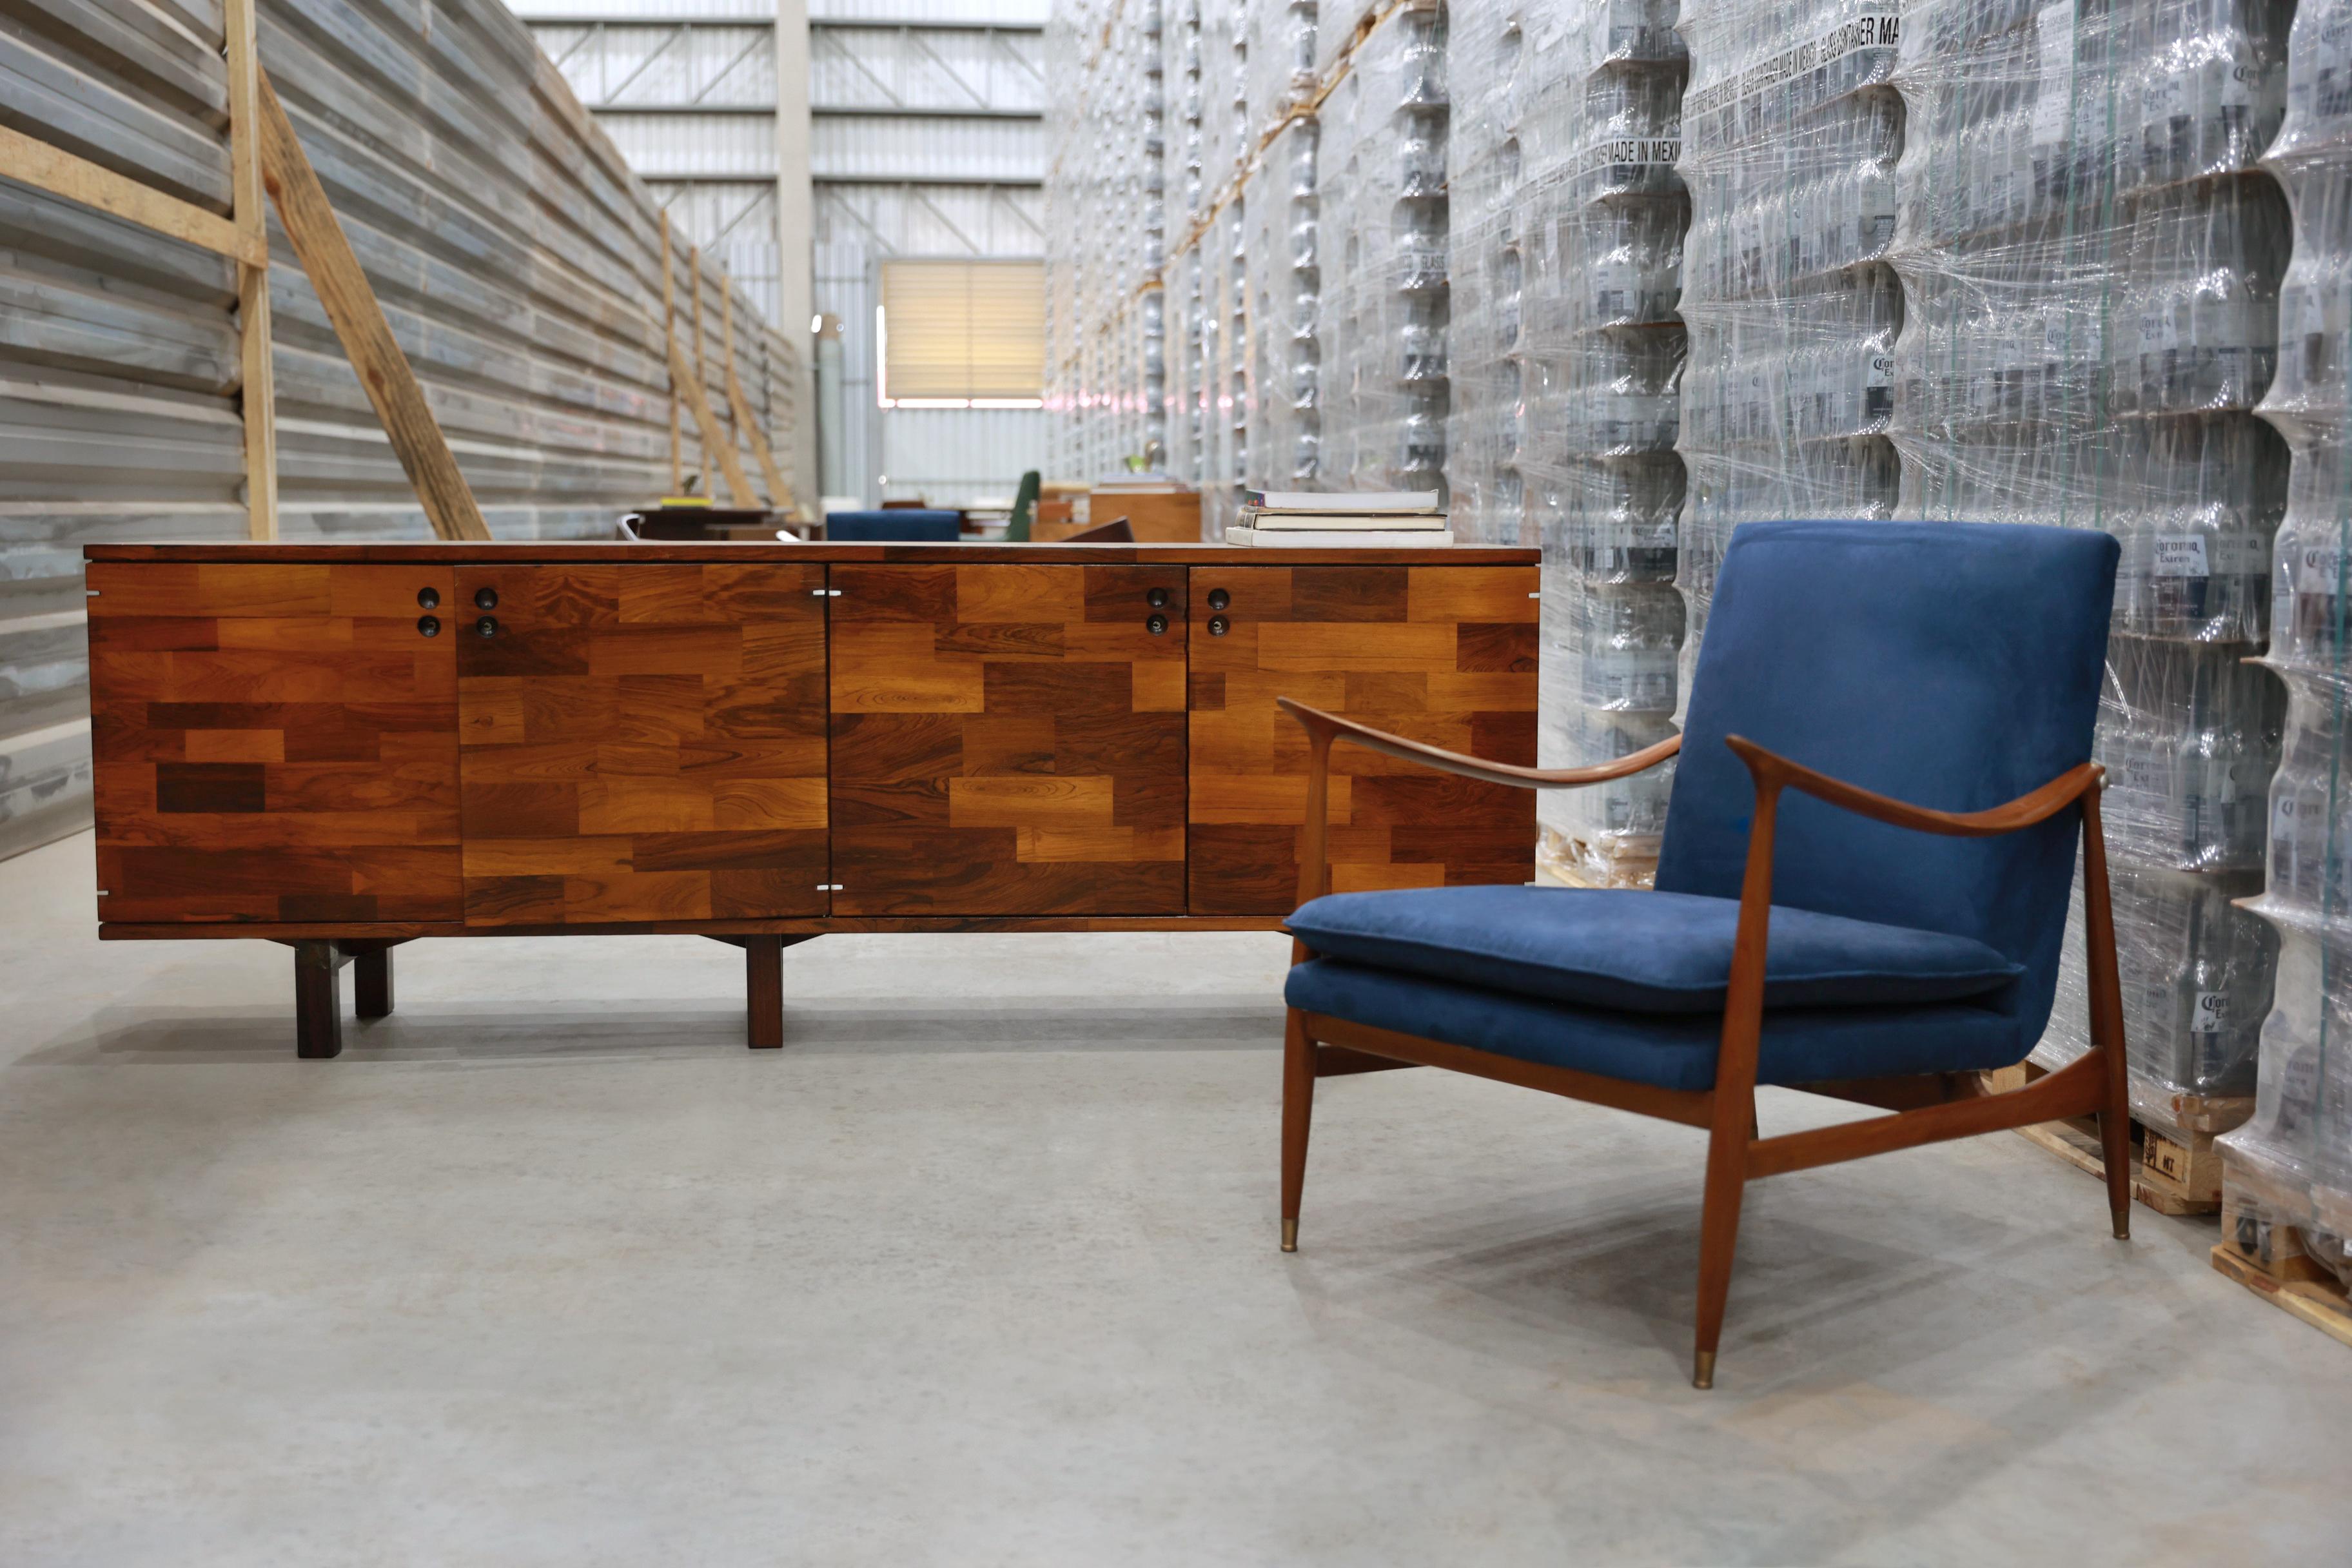 Mid-Century Modern Credenza in Hardwood Patchwork style by Jorge Zalszupin, 1960’s For Sale